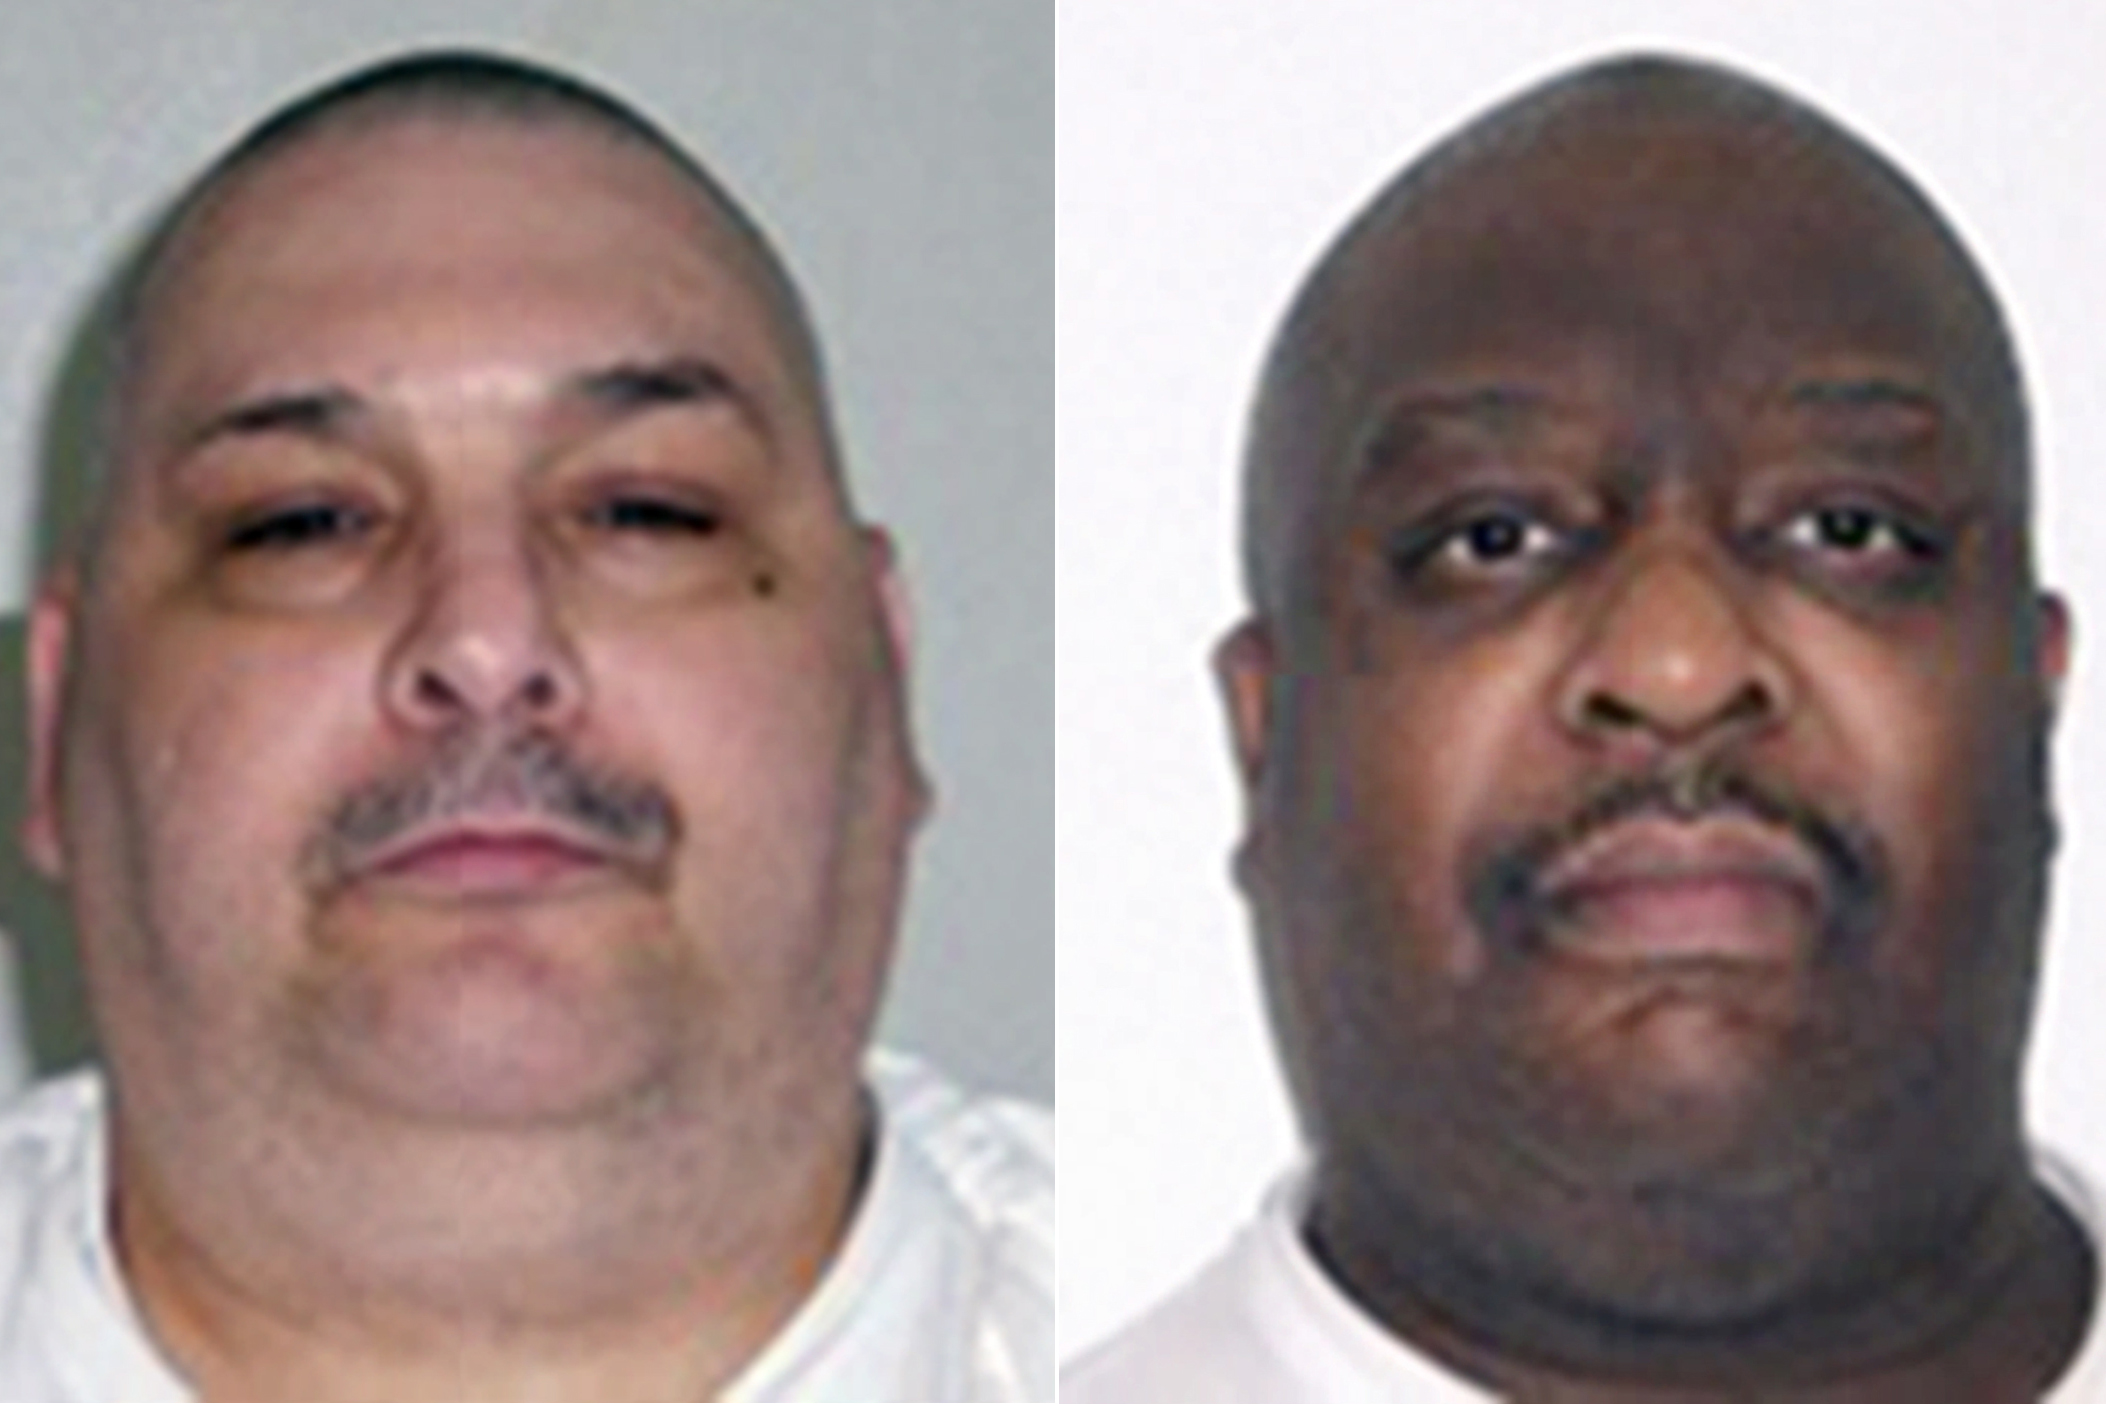 This combination of undated photos provided by the Arkansas Department of Correction shows death-row inmates Jack Harold Jones Jr., left, and Marcel Williams. Both men are scheduled for execution on April 24, 2017. (Arkansas Department of Correction/AP)